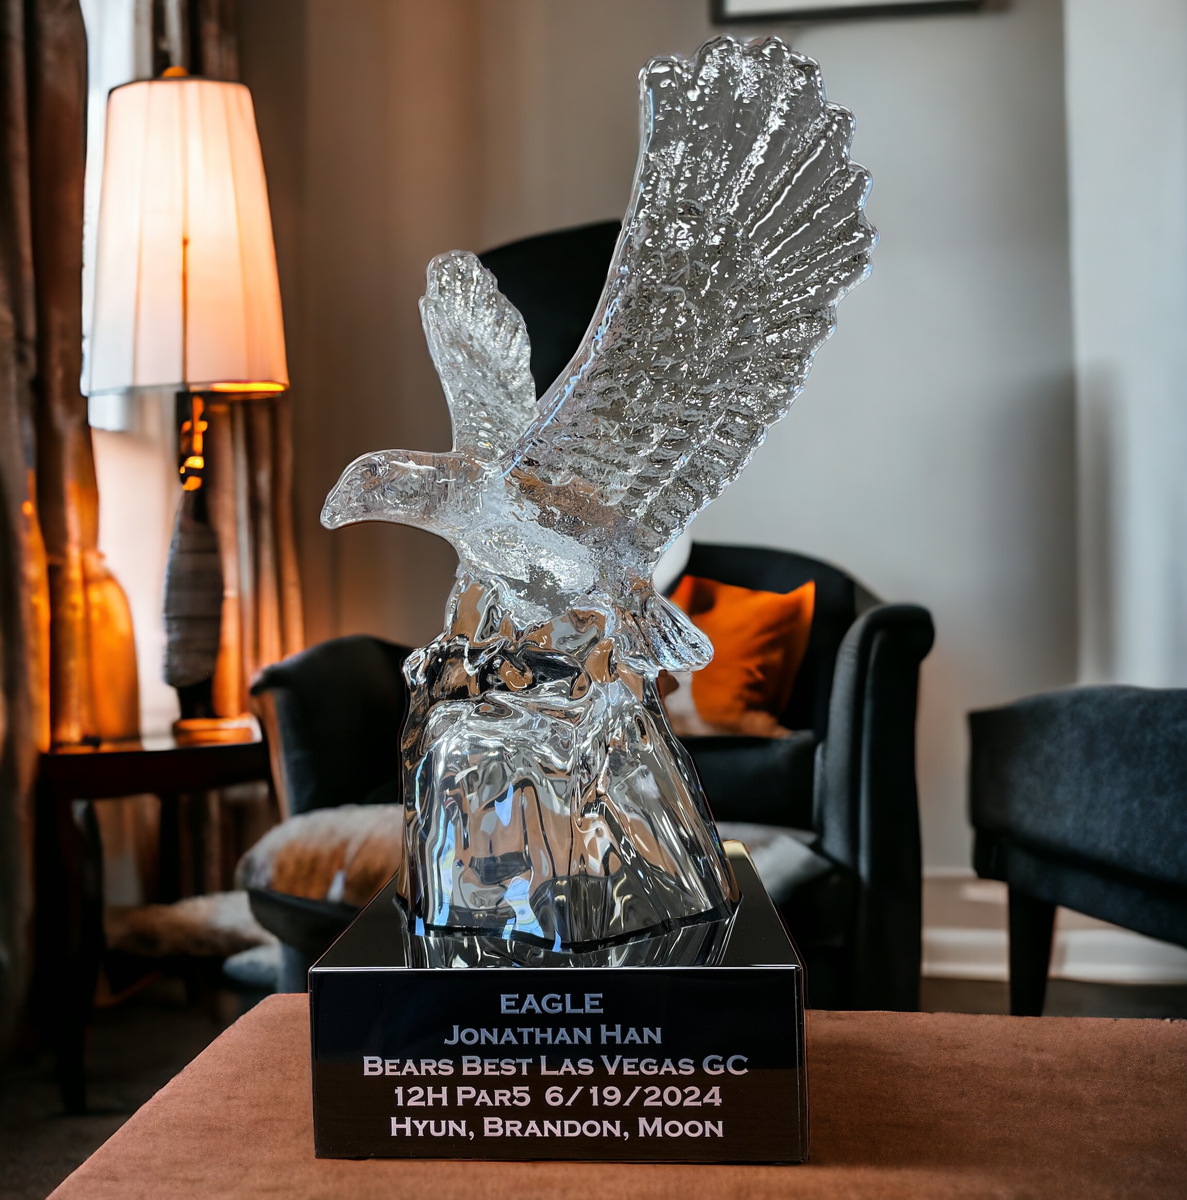 Our Crystal Eagle Statue features a clear crystal eagle with his eagles spread wide mounted on a black base. The base includes a black & silver engraving plate with personalization on it. This K9117 eagle statue is sitting on a wood desk in front of a chair & lamp.